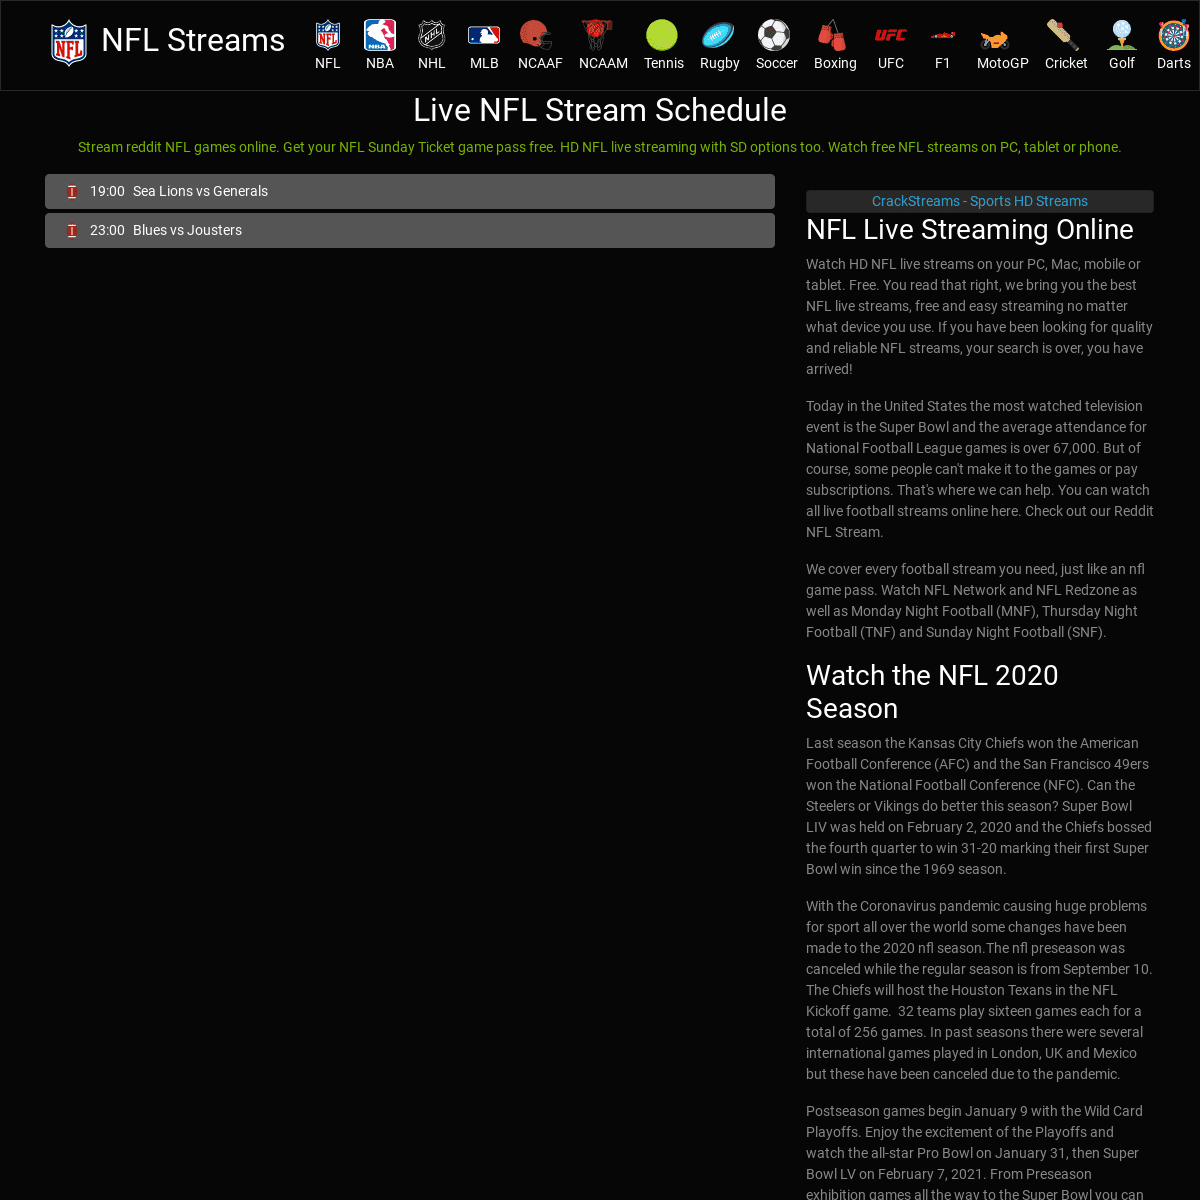 A complete backup of https://nflstream.io